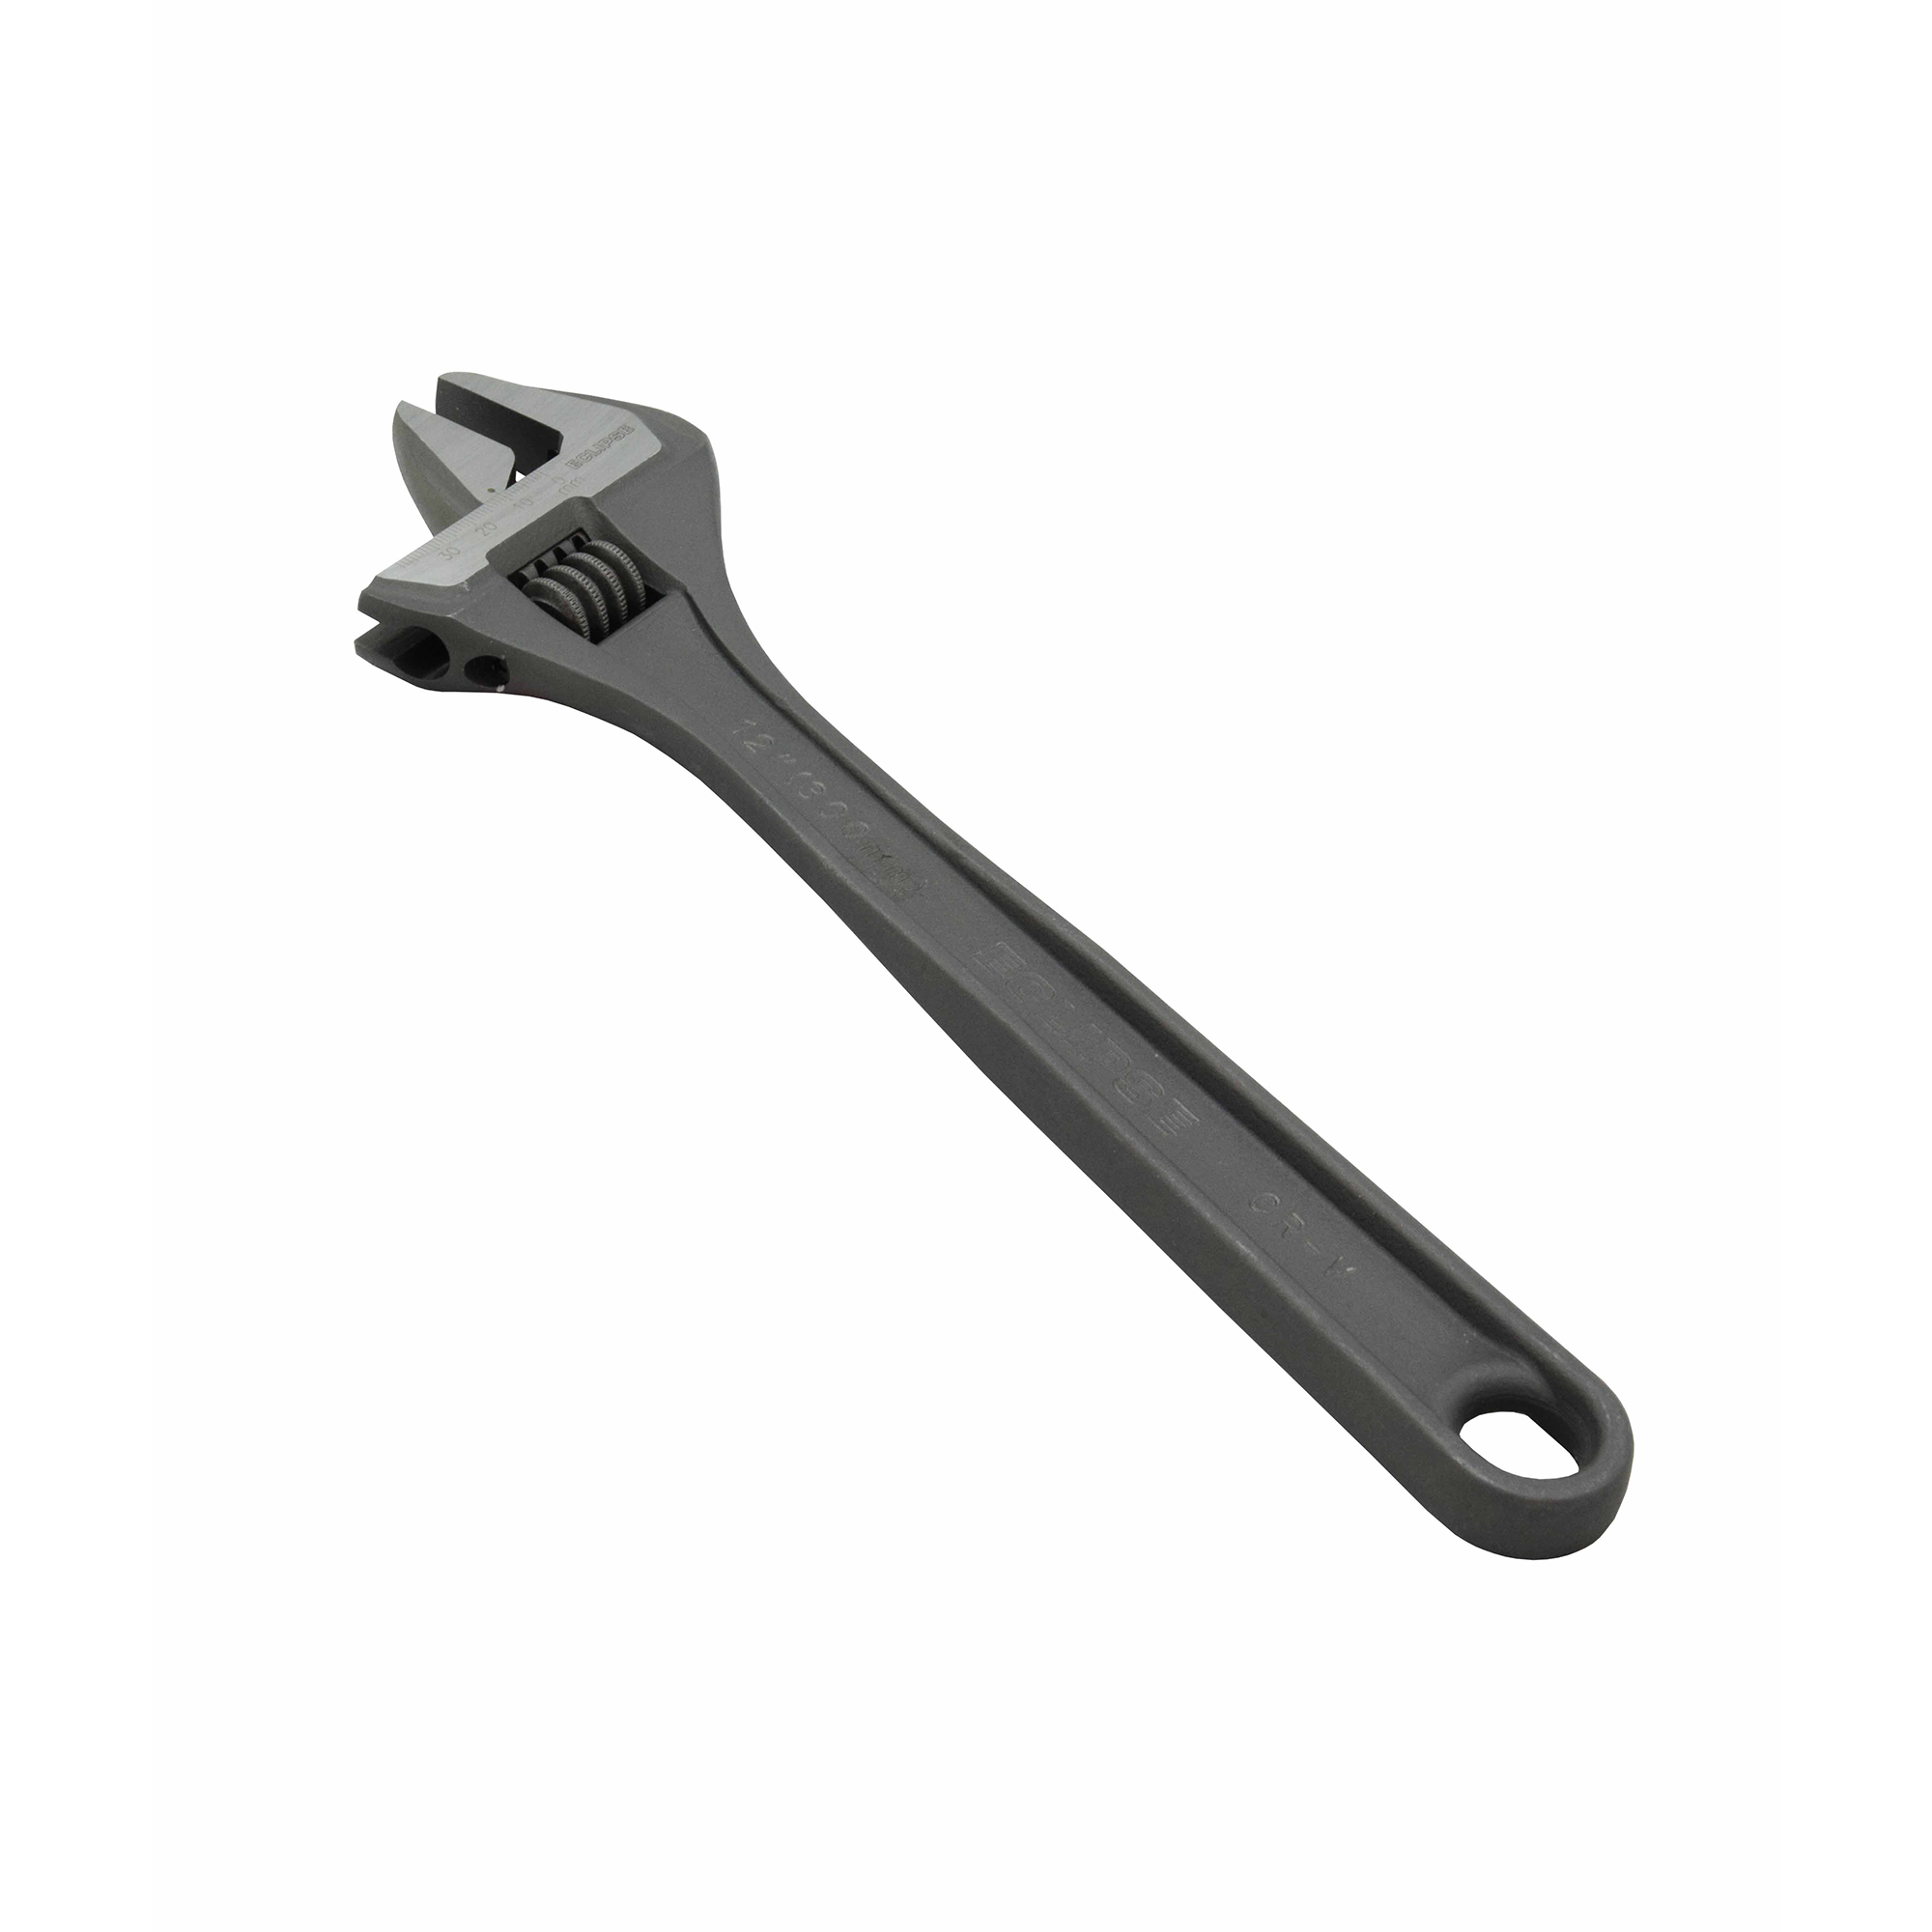 Pro Plus Adjustable Wrench by Eclipse